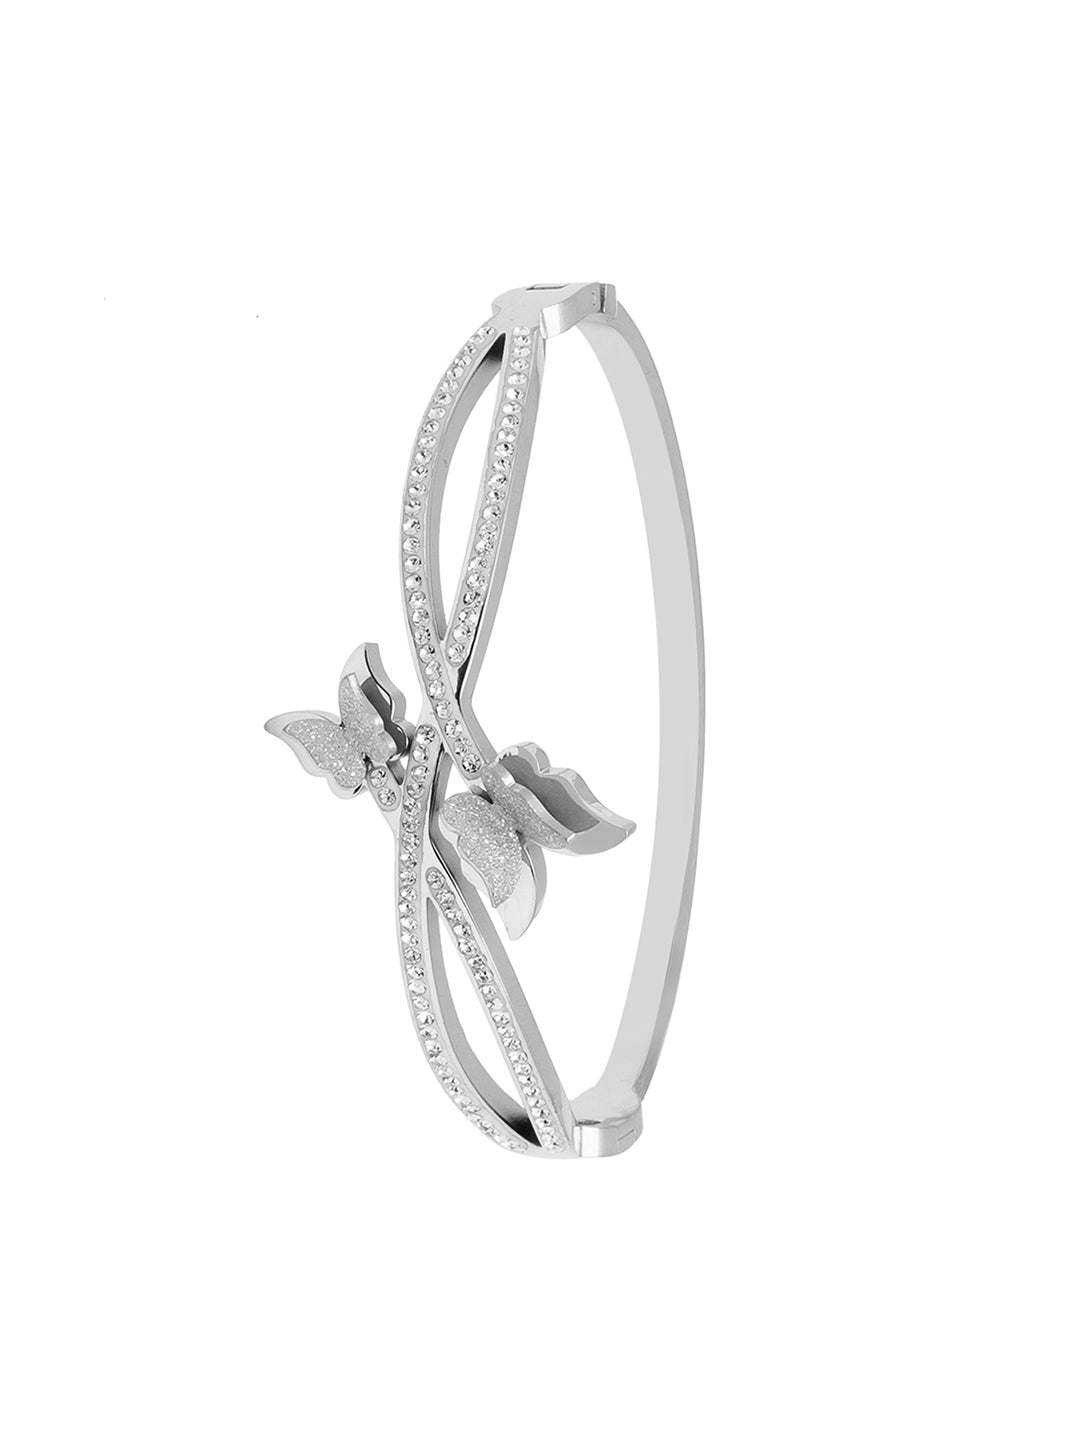 MOONDUST Silver Rhodium Plated CZ and Crystal Studded Western Butterfly Style Freesize Bracelet Bangle for Women (MD_3294_S)